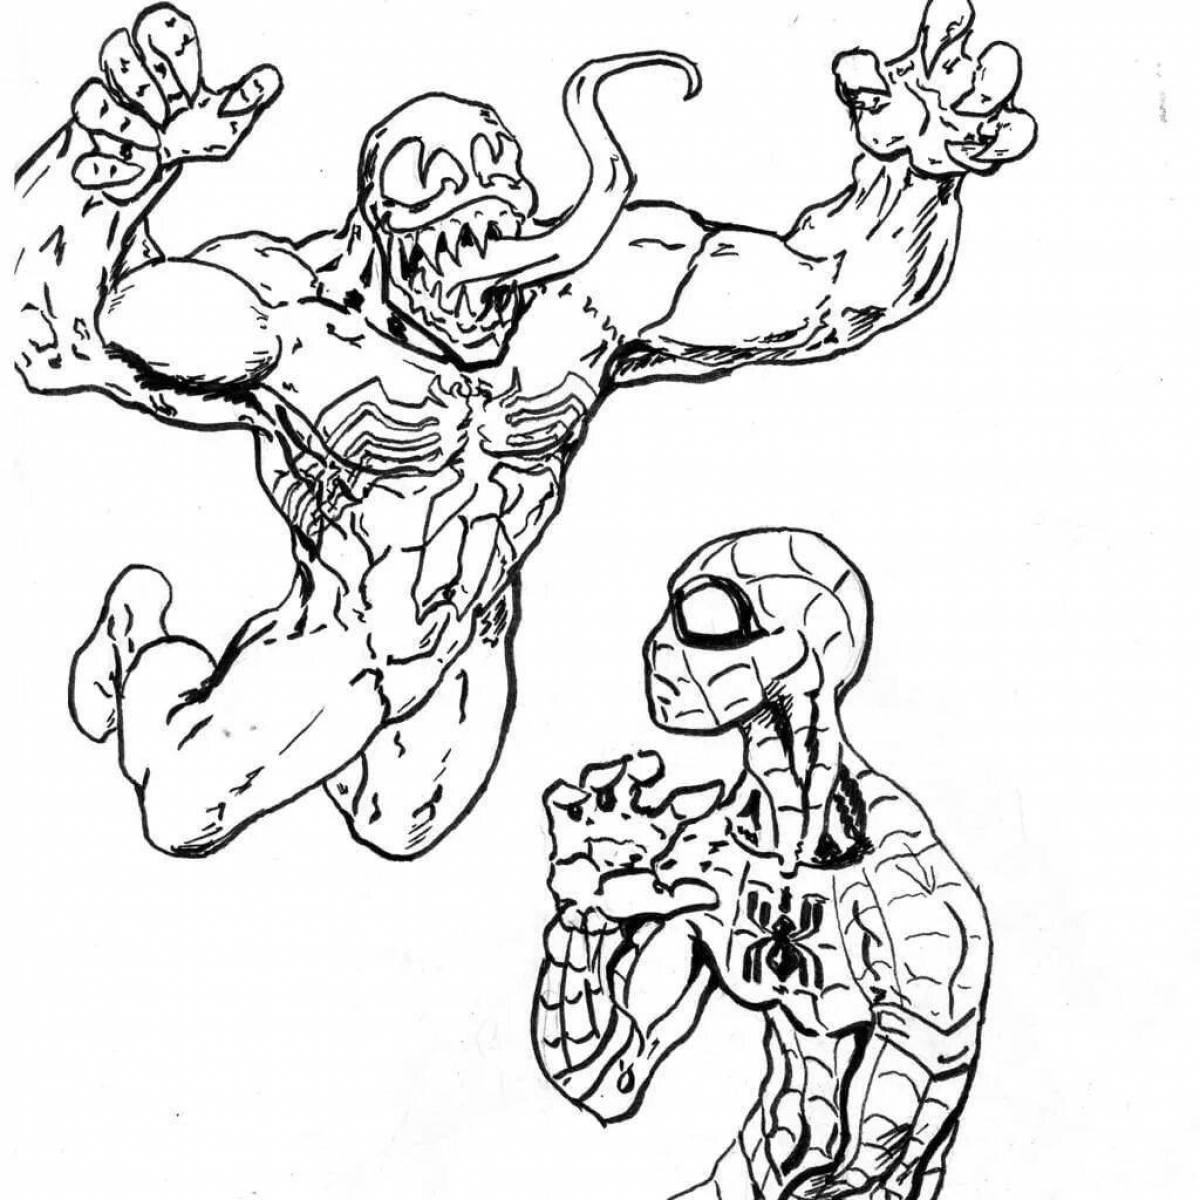 Zombie spiderman coloring page